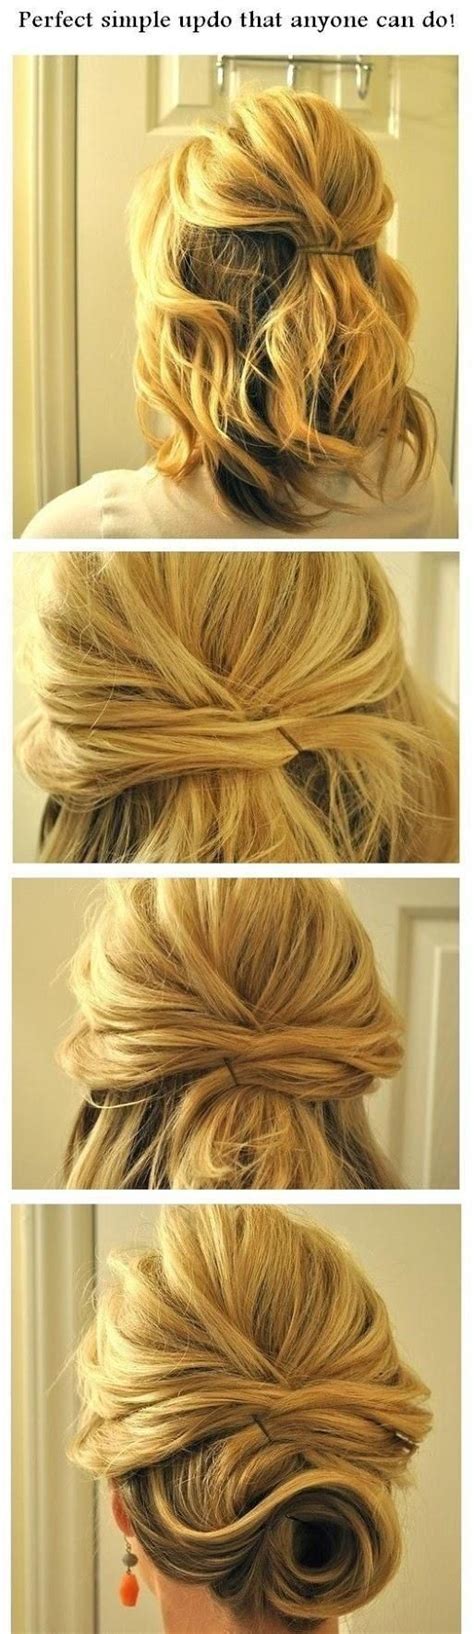 Unconventionally cute and charming, this braided updo for medium hair is one to die for. 12 Trendy Low Bun Updo Hairstyles Tutorials: Easy Cute ...